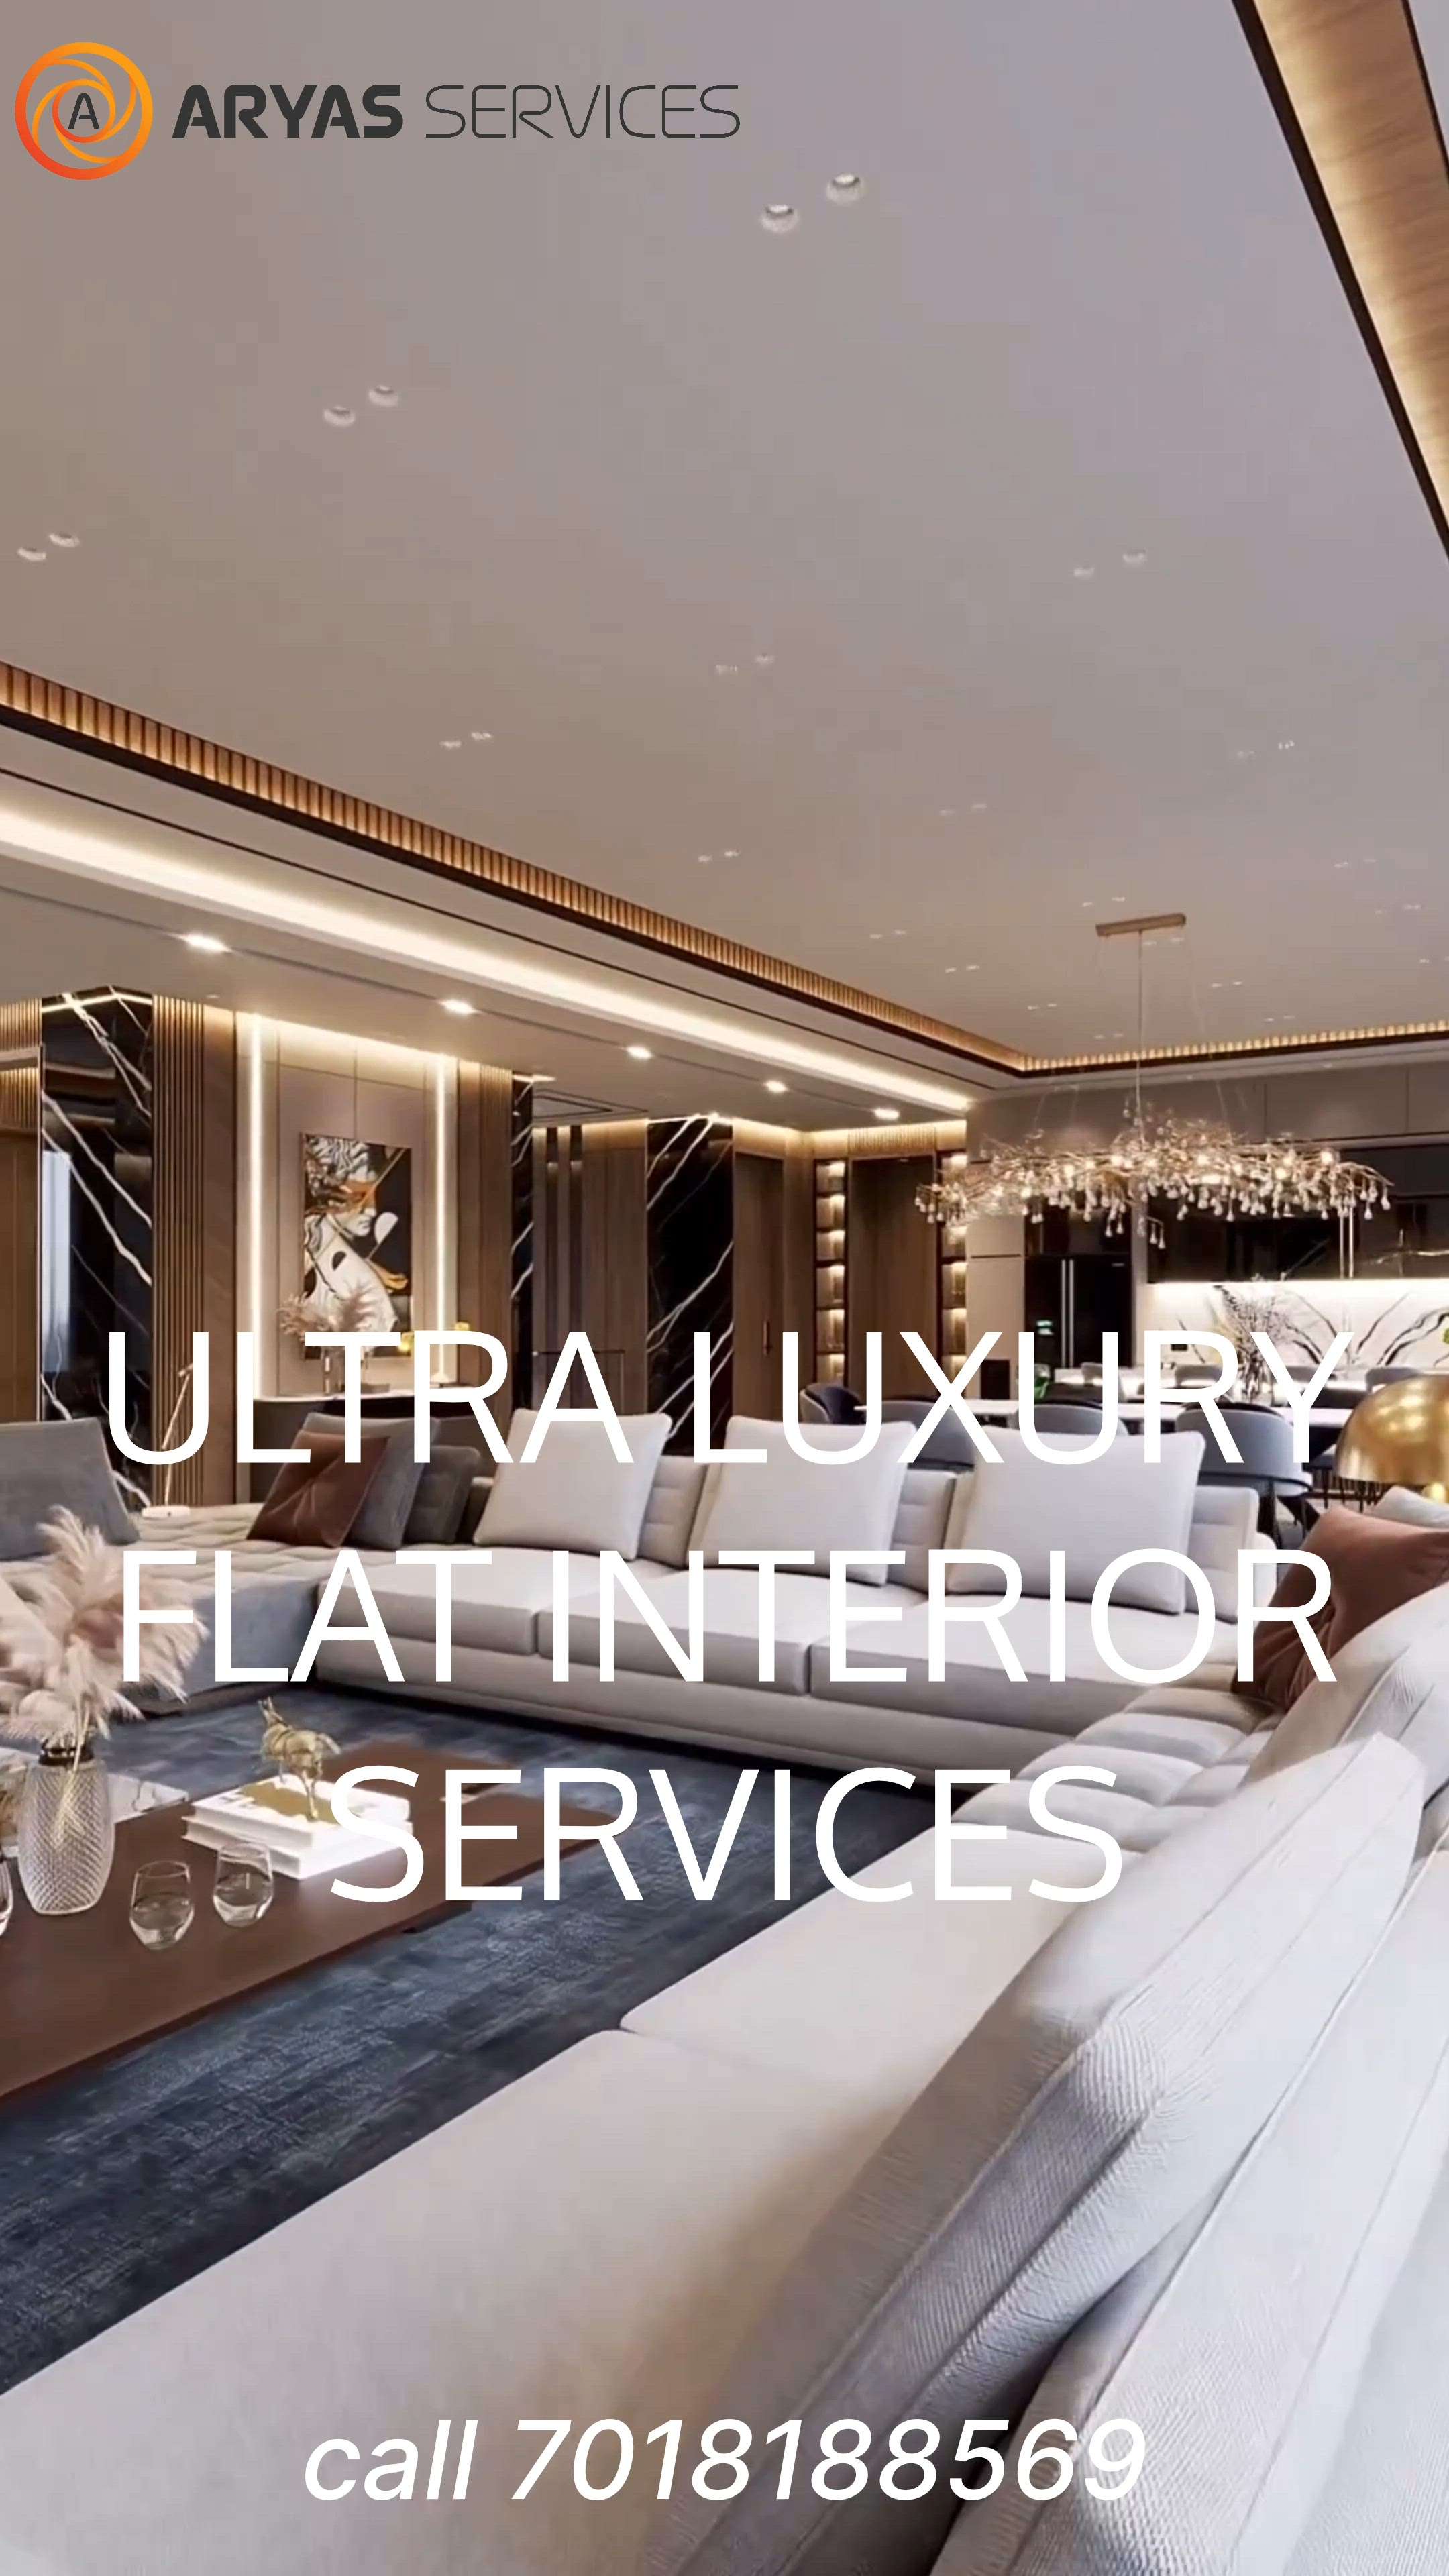 Ultra luxury Interior services by Aryas interio & Infra services. One of best leading interior decorator delhi NCR 2024, Give your home a new look, luxury flat interiors services by Aryas interio & Infra Services,
Provide complete end to end Professional Construction & interior Services in Delhi Ncr, Gurugram, Ghaziabad, Noida, Greater Noida, Faridabad, chandigarh, Manali and Shimla. Contact us right now for any interior or renovation work, call us @ +91-7018188569 &
Visit our website at www.designinterios.com
Follow us on Instagram #aryasinterio and Facebook @aryasinterio .
#uttarpradesh #construction_himachal
#noidainterior #noida #delhincr #delhi #Delhihome  #noidaconstruction #interiordesign #interior #interiors #interiordesigner #interiordecor #interiorstyling #delhiinteriors #greaternoida #faridabad #ghaziabadinterior #ghaziabad  #chandigarh